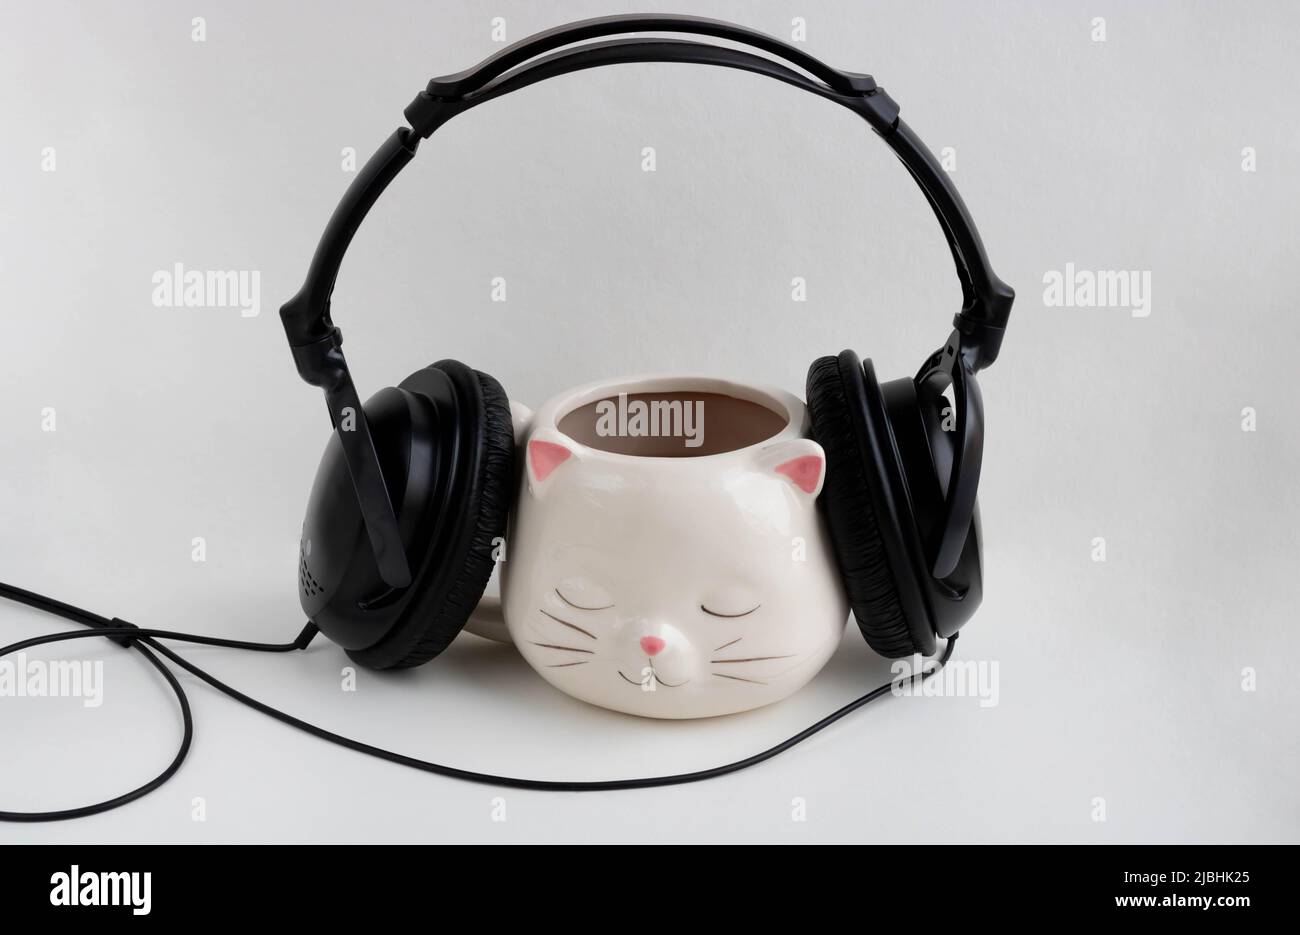 Black headphones are worn on a white coffee mug in the shape of a cat with pink ears, close-up on a white background. Stock Photo